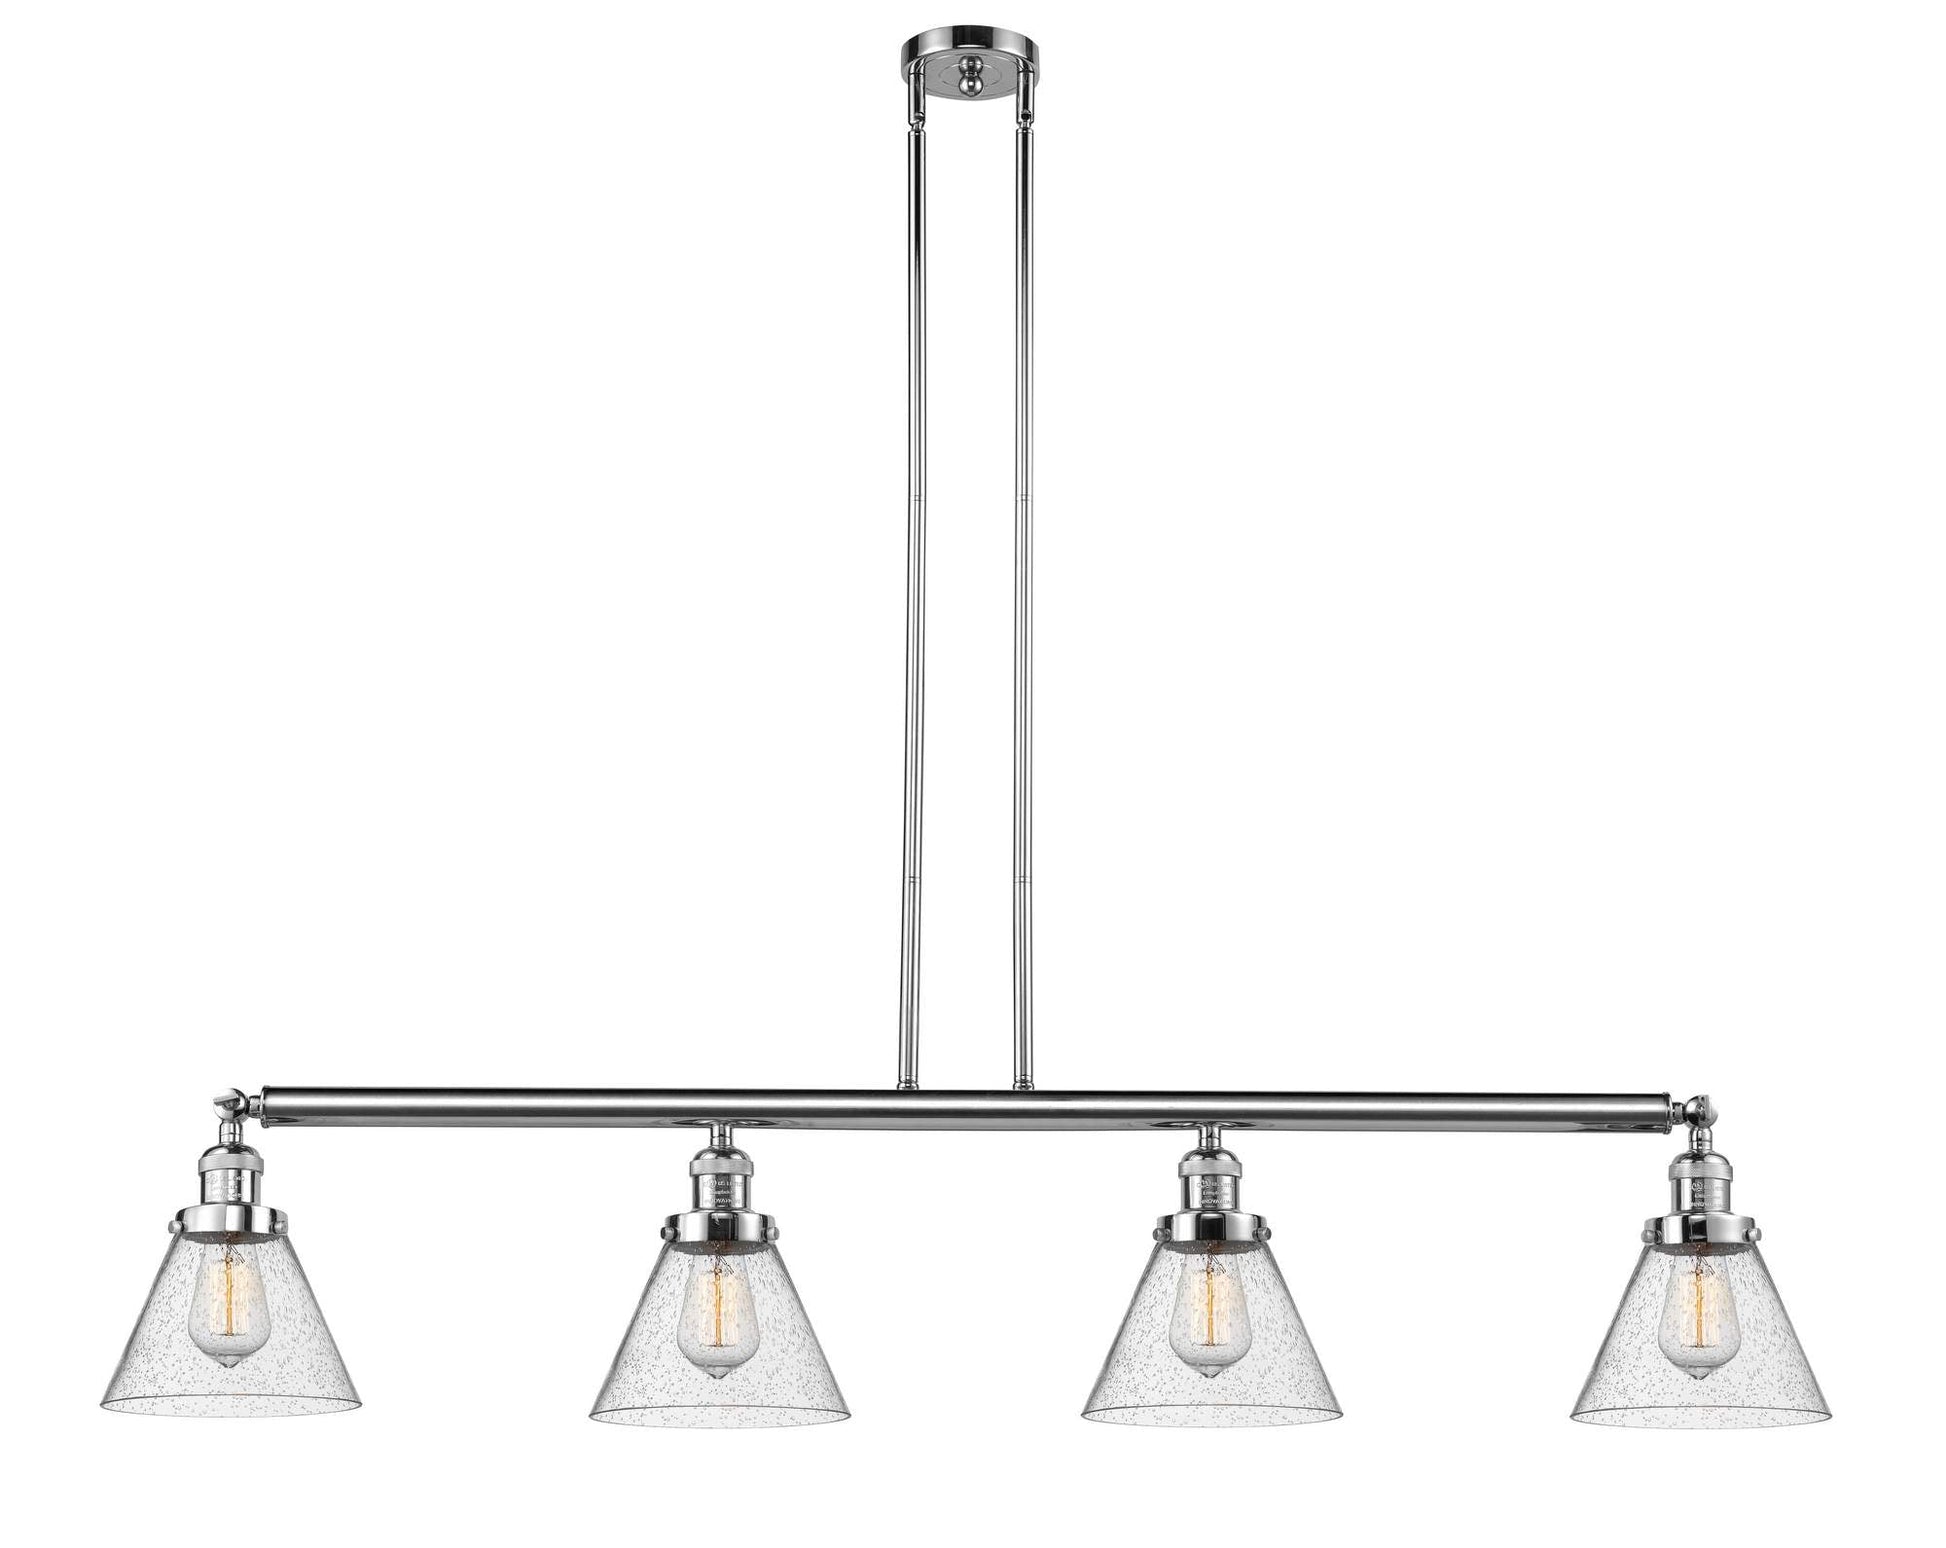 214-PC-G44 4-Light 52.375" Polished Chrome Island Light - Seedy Large Cone Glass - LED Bulb - Dimmensions: 52.375 x 7.75 x 10<br>Minimum Height : 20.25<br>Maximum Height : 44.25 - Sloped Ceiling Compatible: Yes